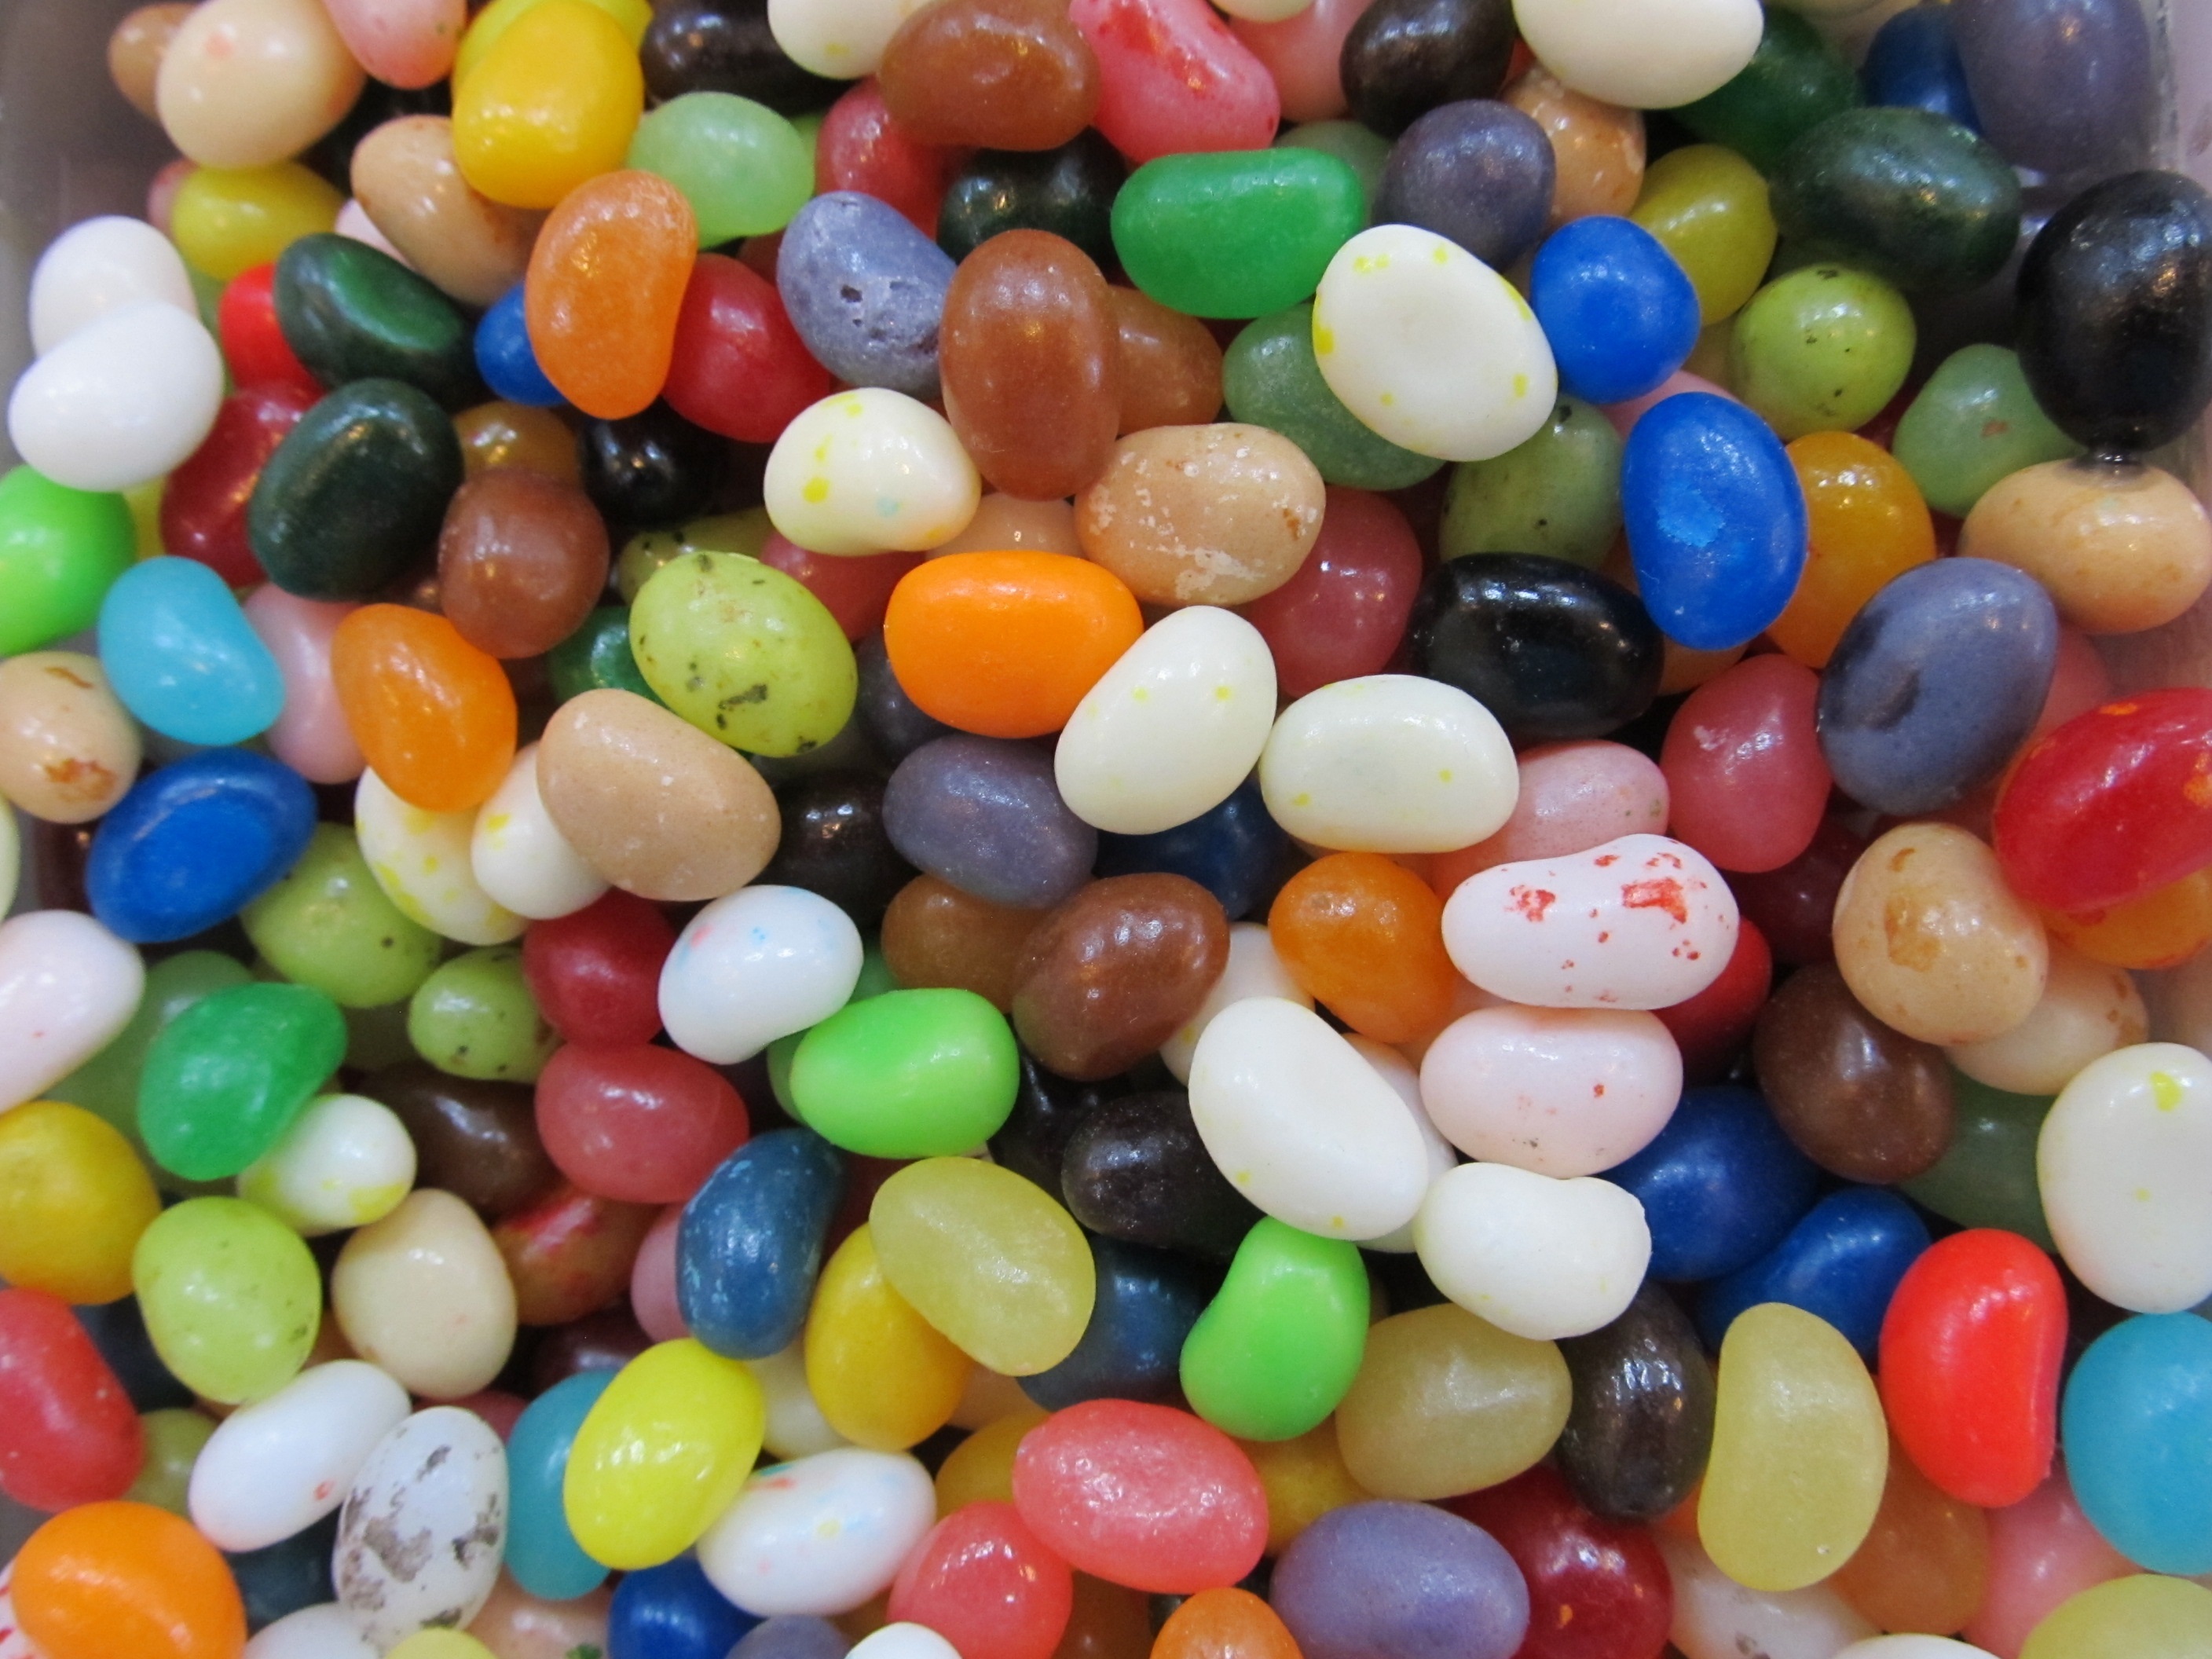 Jelly beans photo